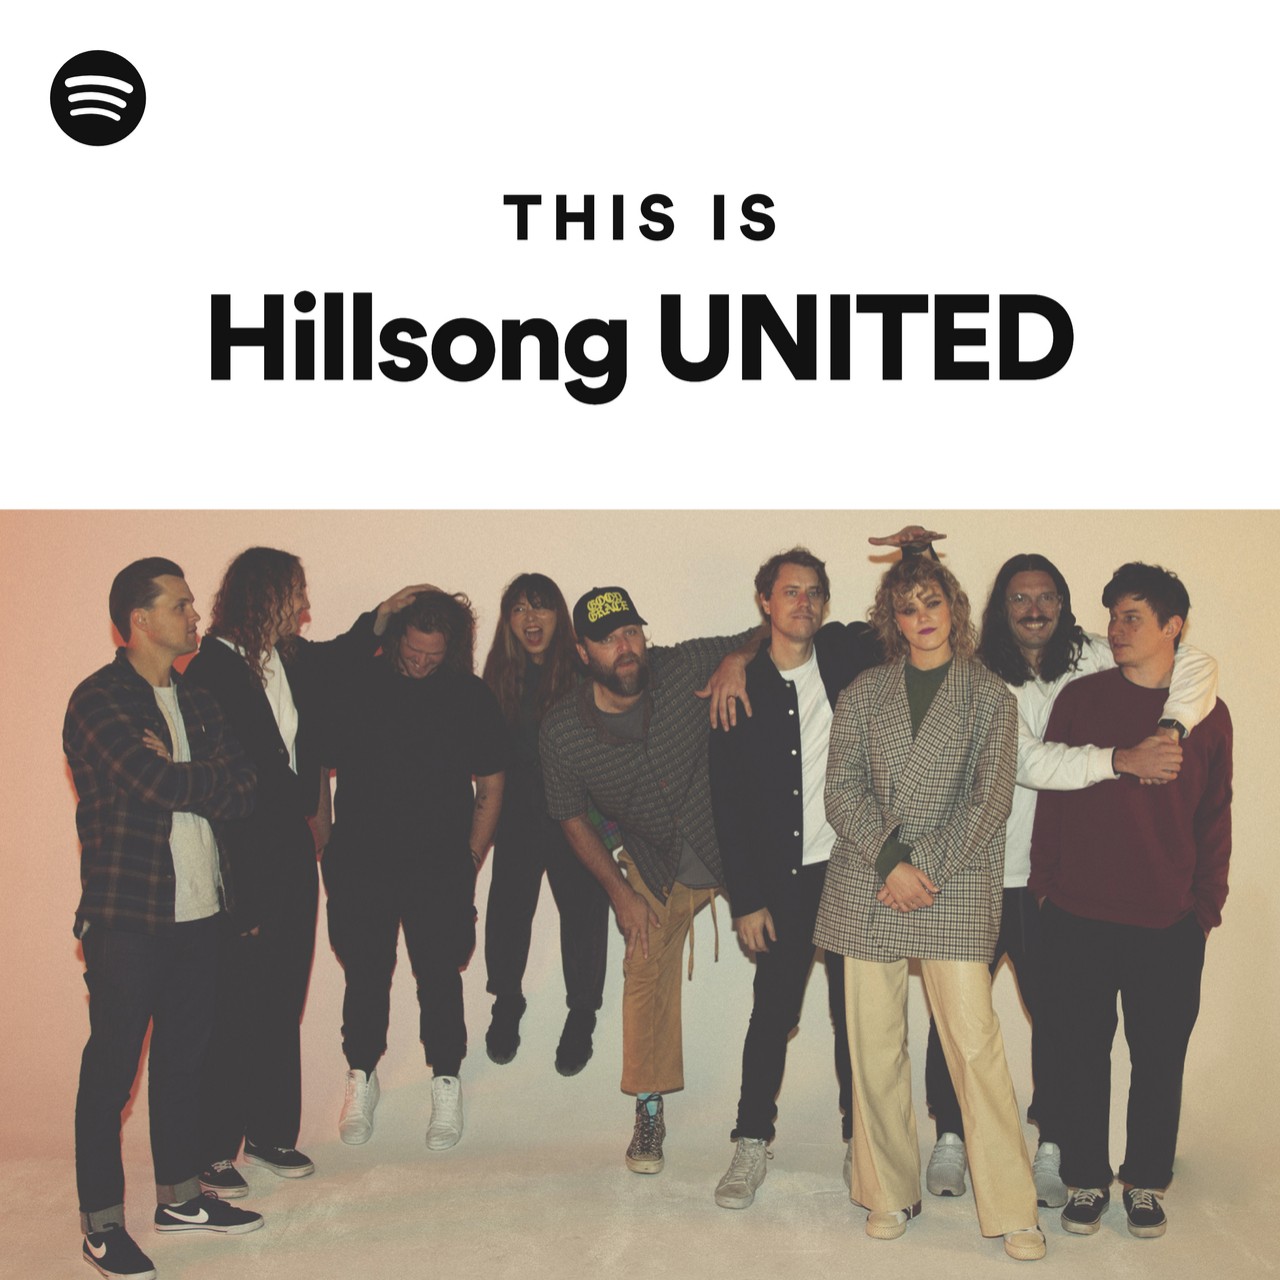 This Is Hillsong UNITED